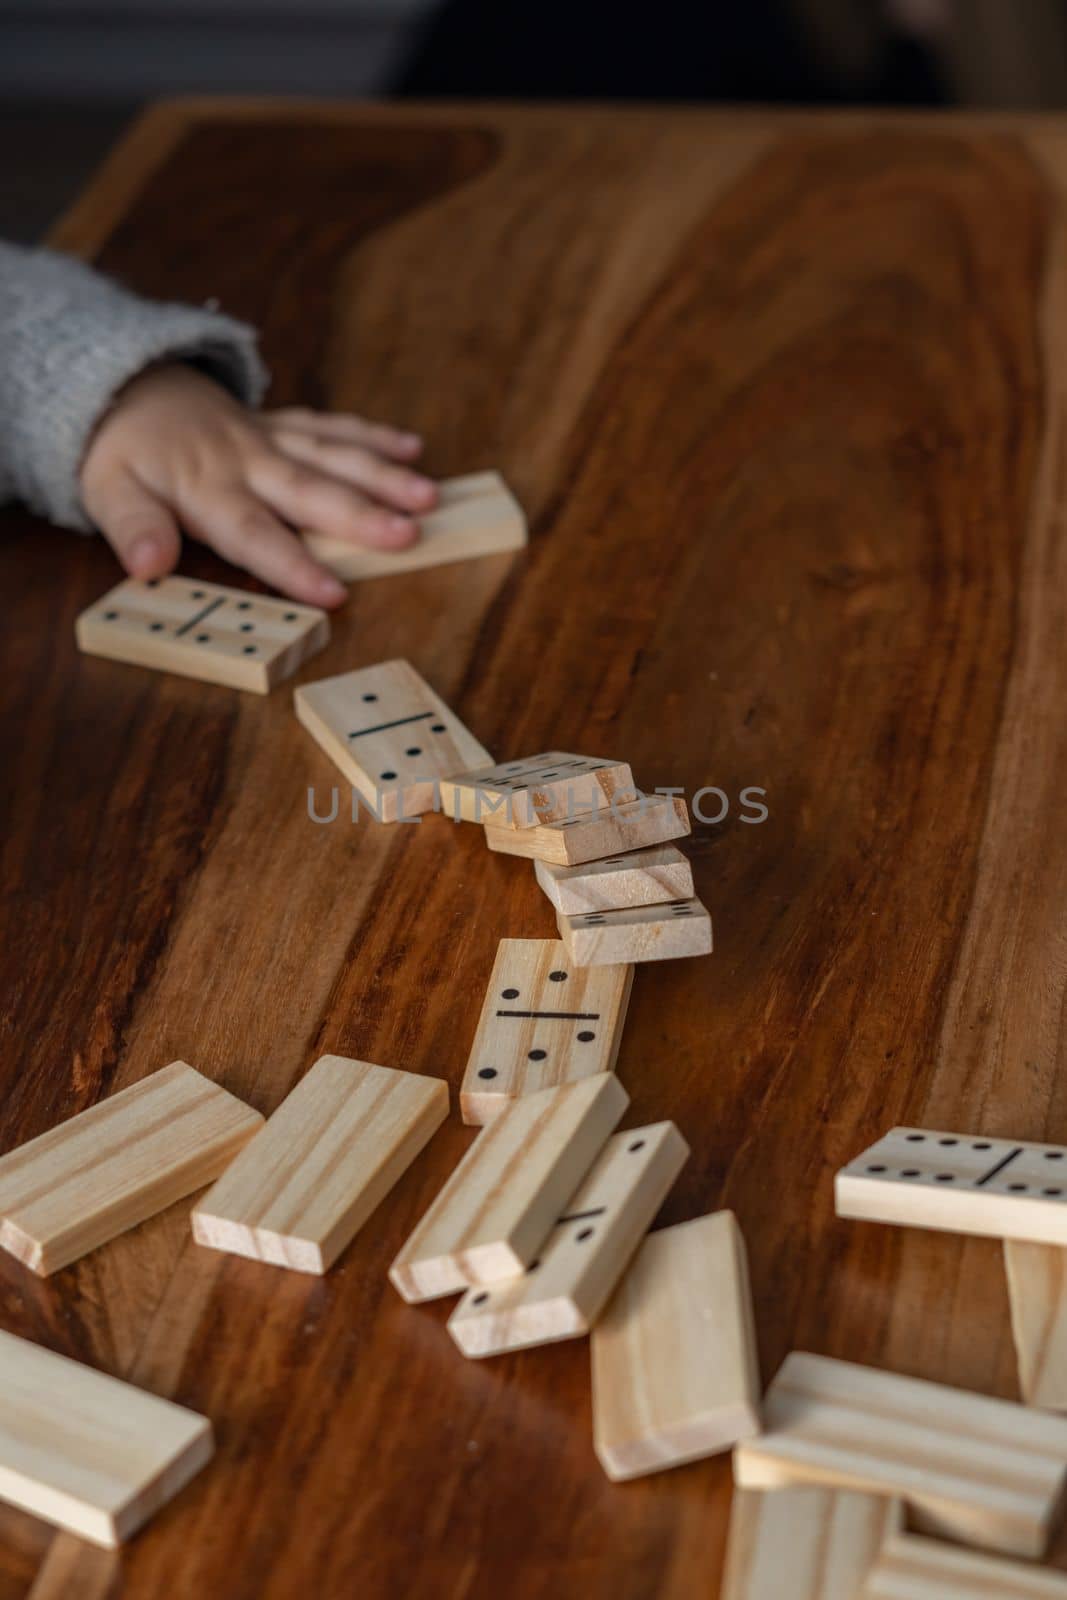 child's hands in gray sweater playing dominoes with blurred focus